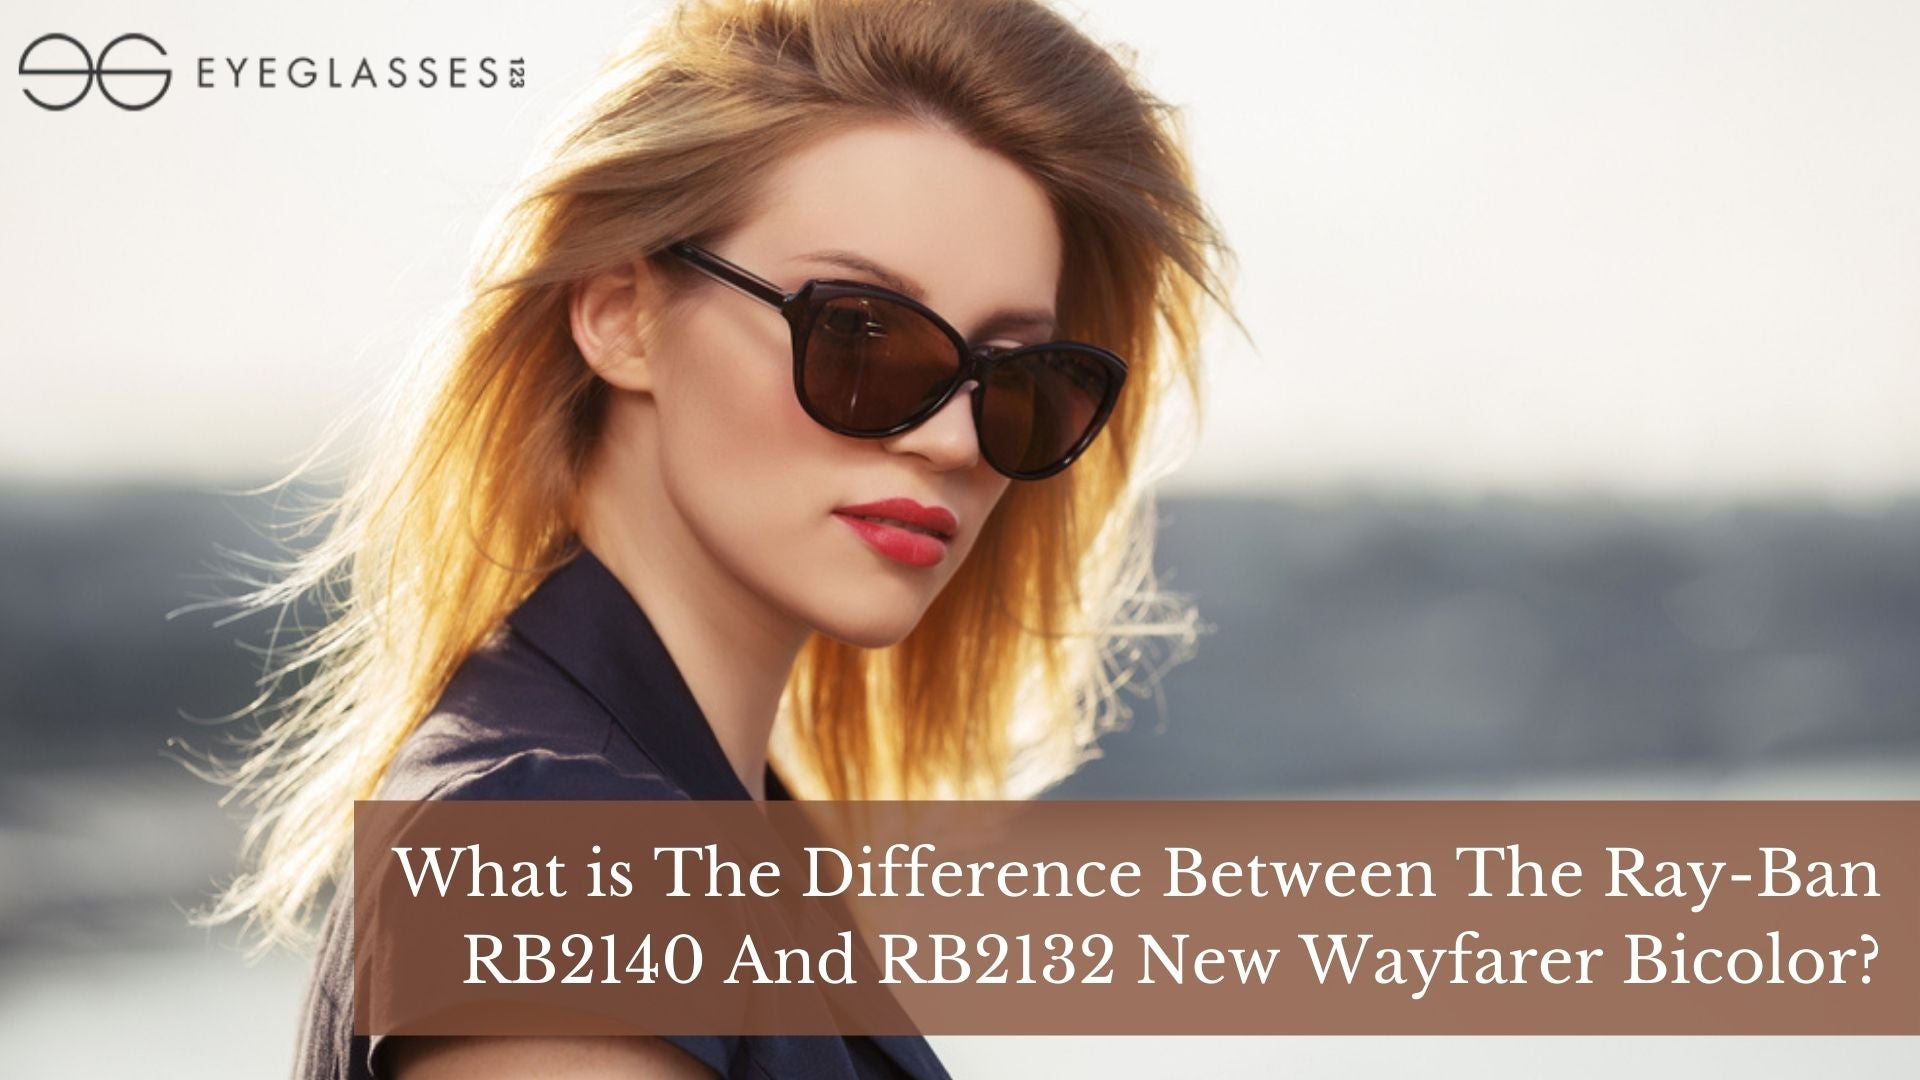 What is The Difference Between The Ray-Ban RB2140 And RB2132 New Wayfarer Bicolor?